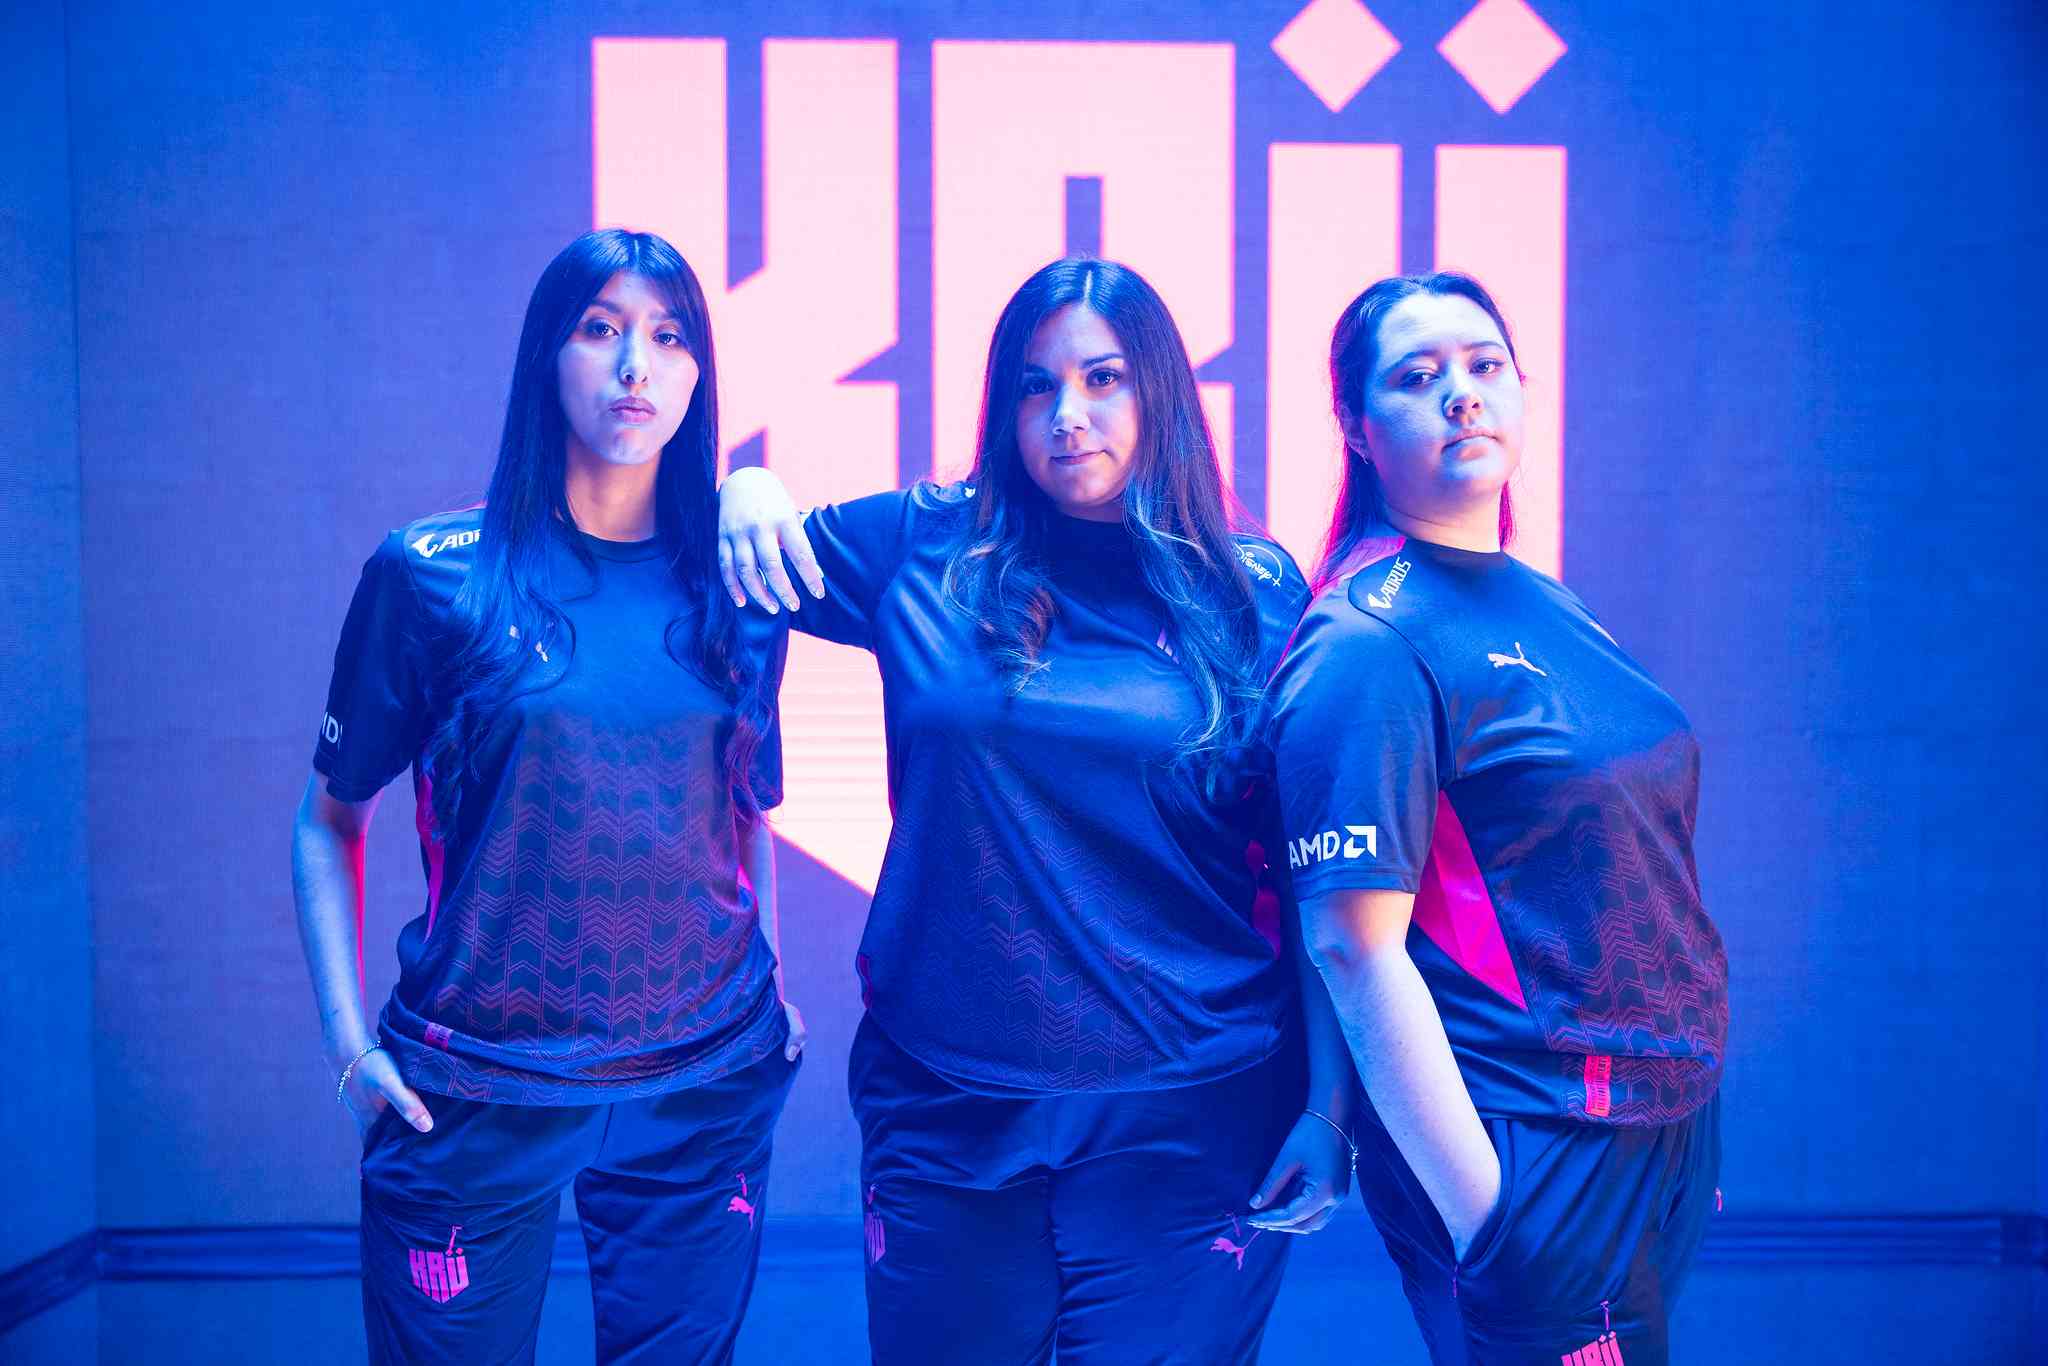 Kalita, consu, and Conir of KRÜ Female poses during a photo shoot before the 2022 GC Championship 